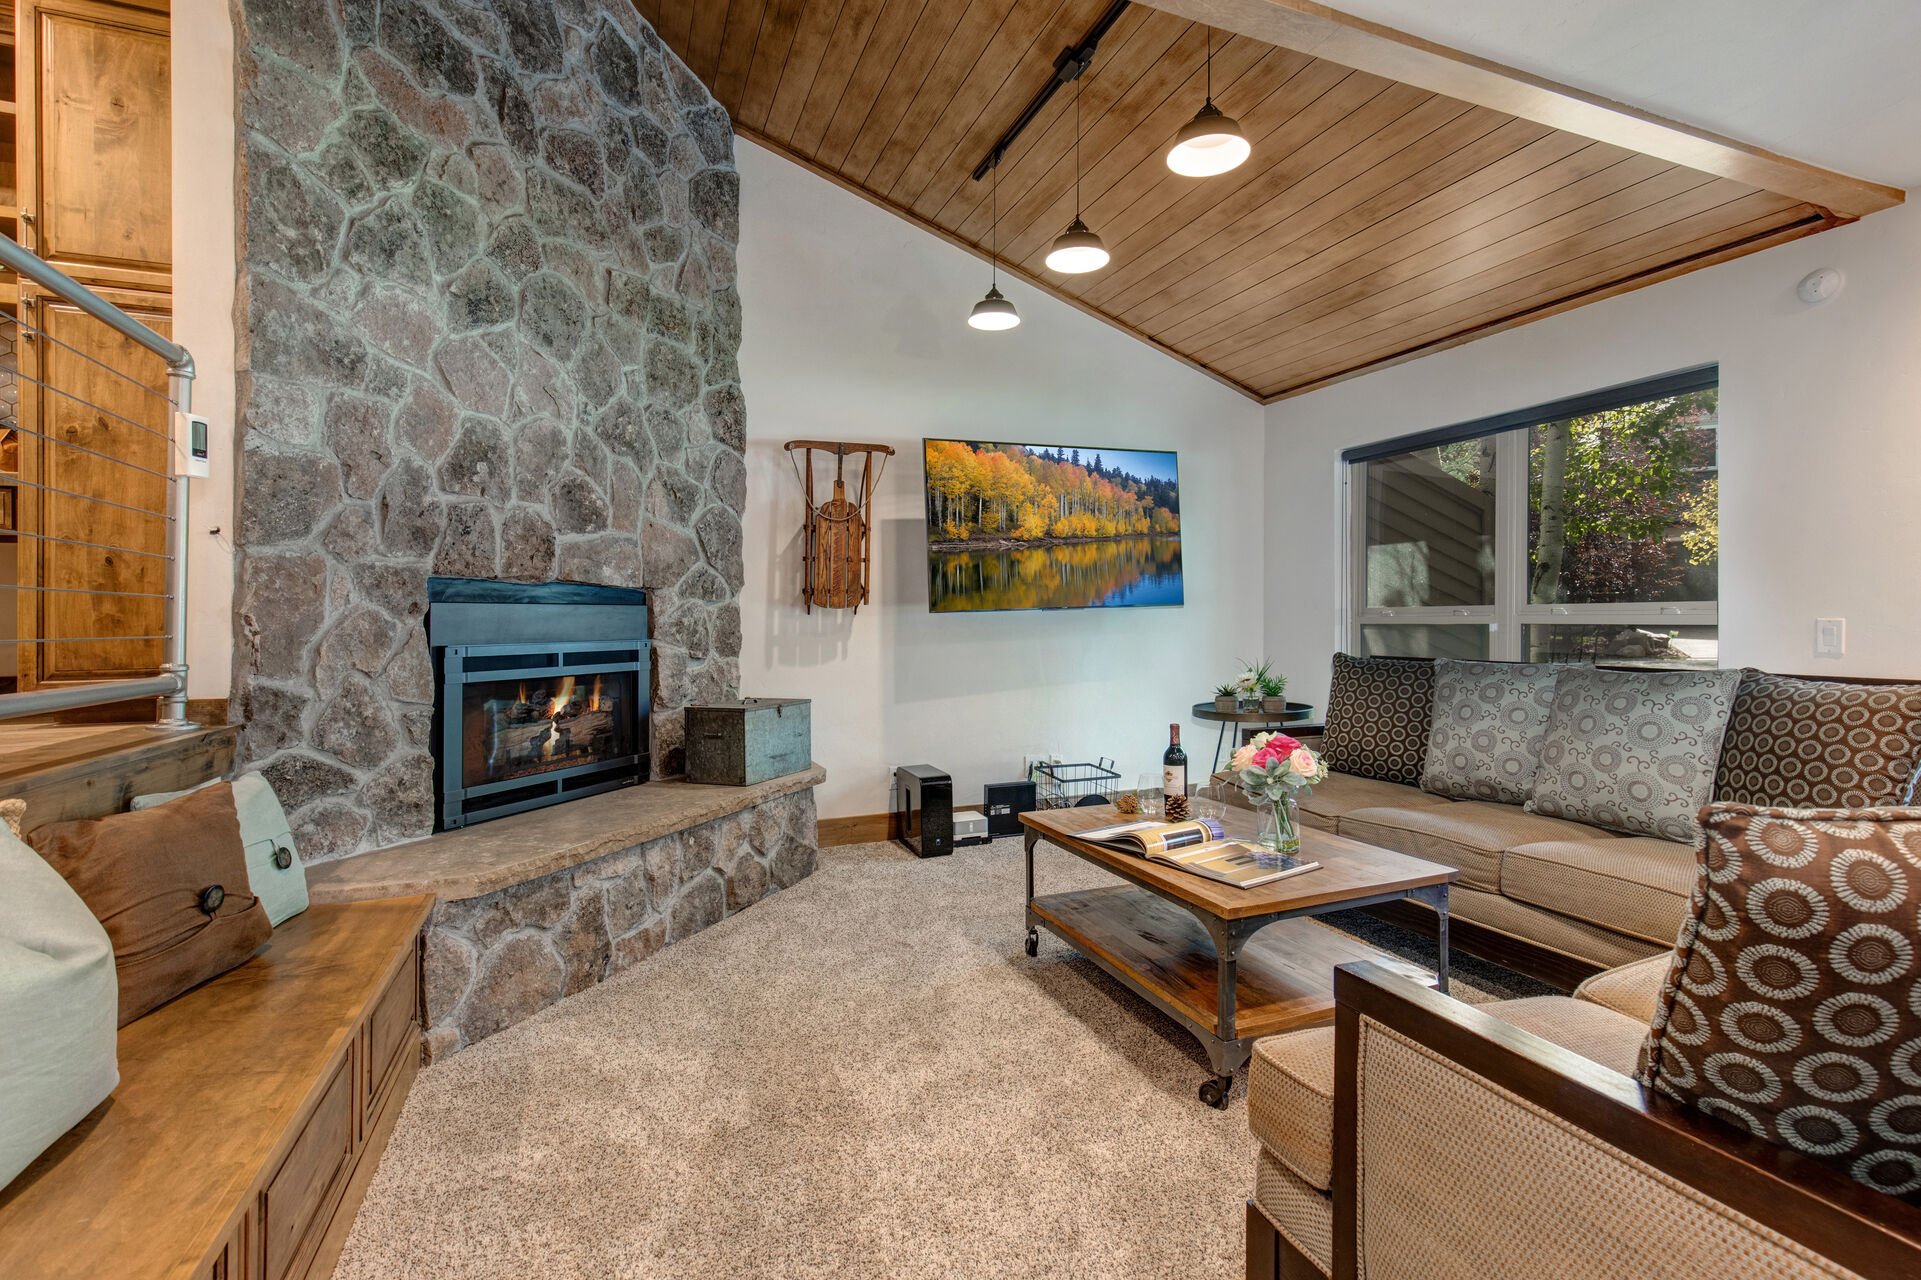 Living Room with cozy gas fireplace, Smart TV, plush furnishings, vaulted ceiling, and patio access.